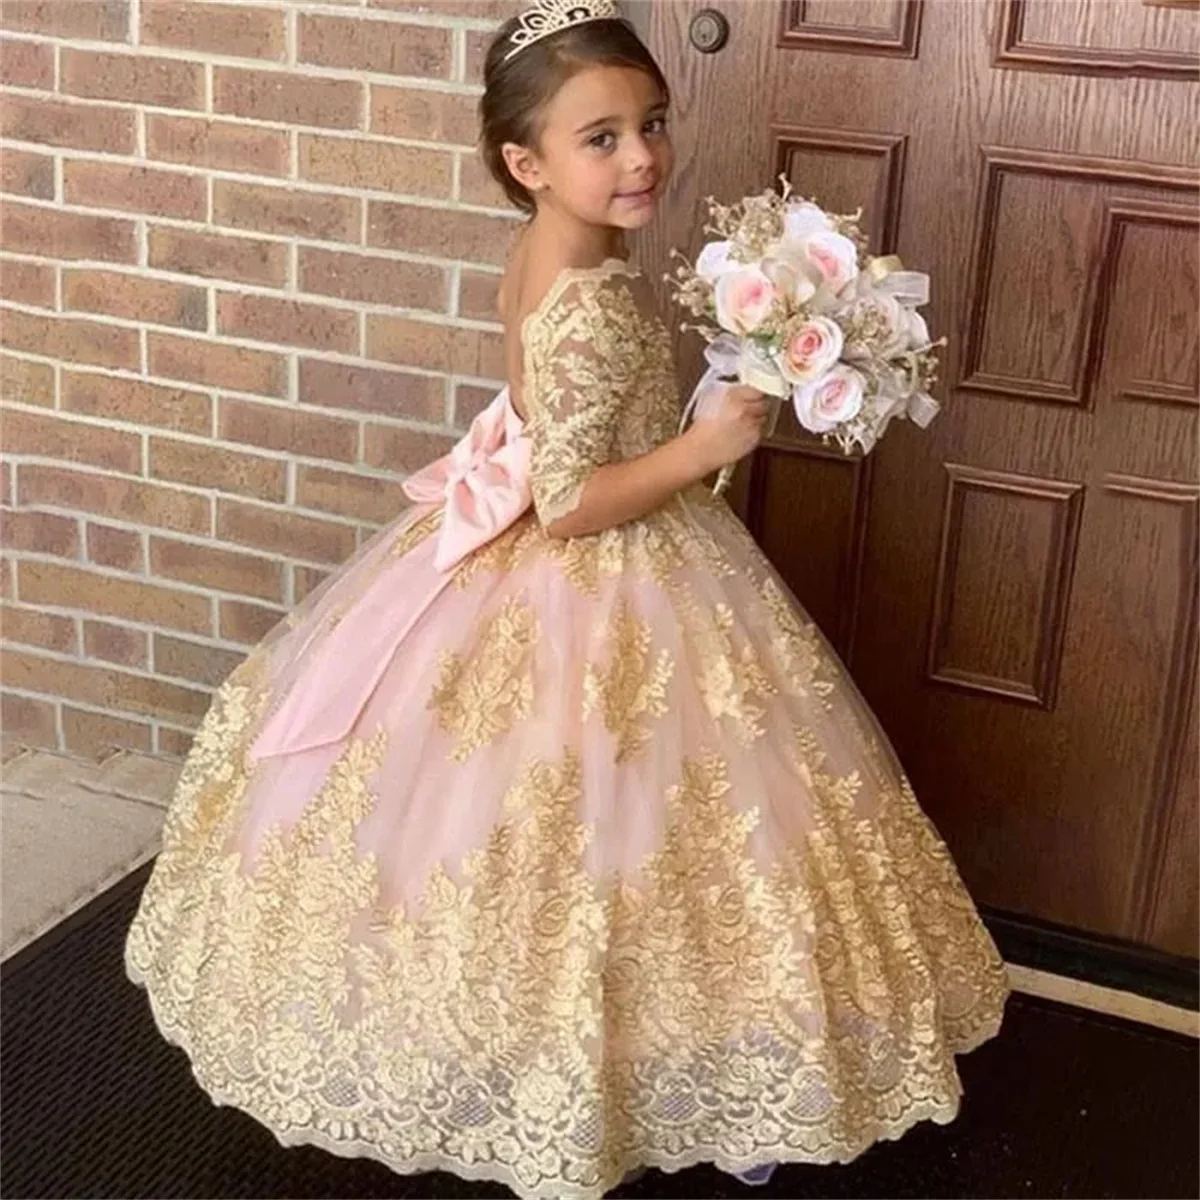 

Flower Girl Dress Pink Tulle Puffy Champagne Gold Lace Bow Belt Backless Luxury Wedding First Communion Birthday Party Ball Gown